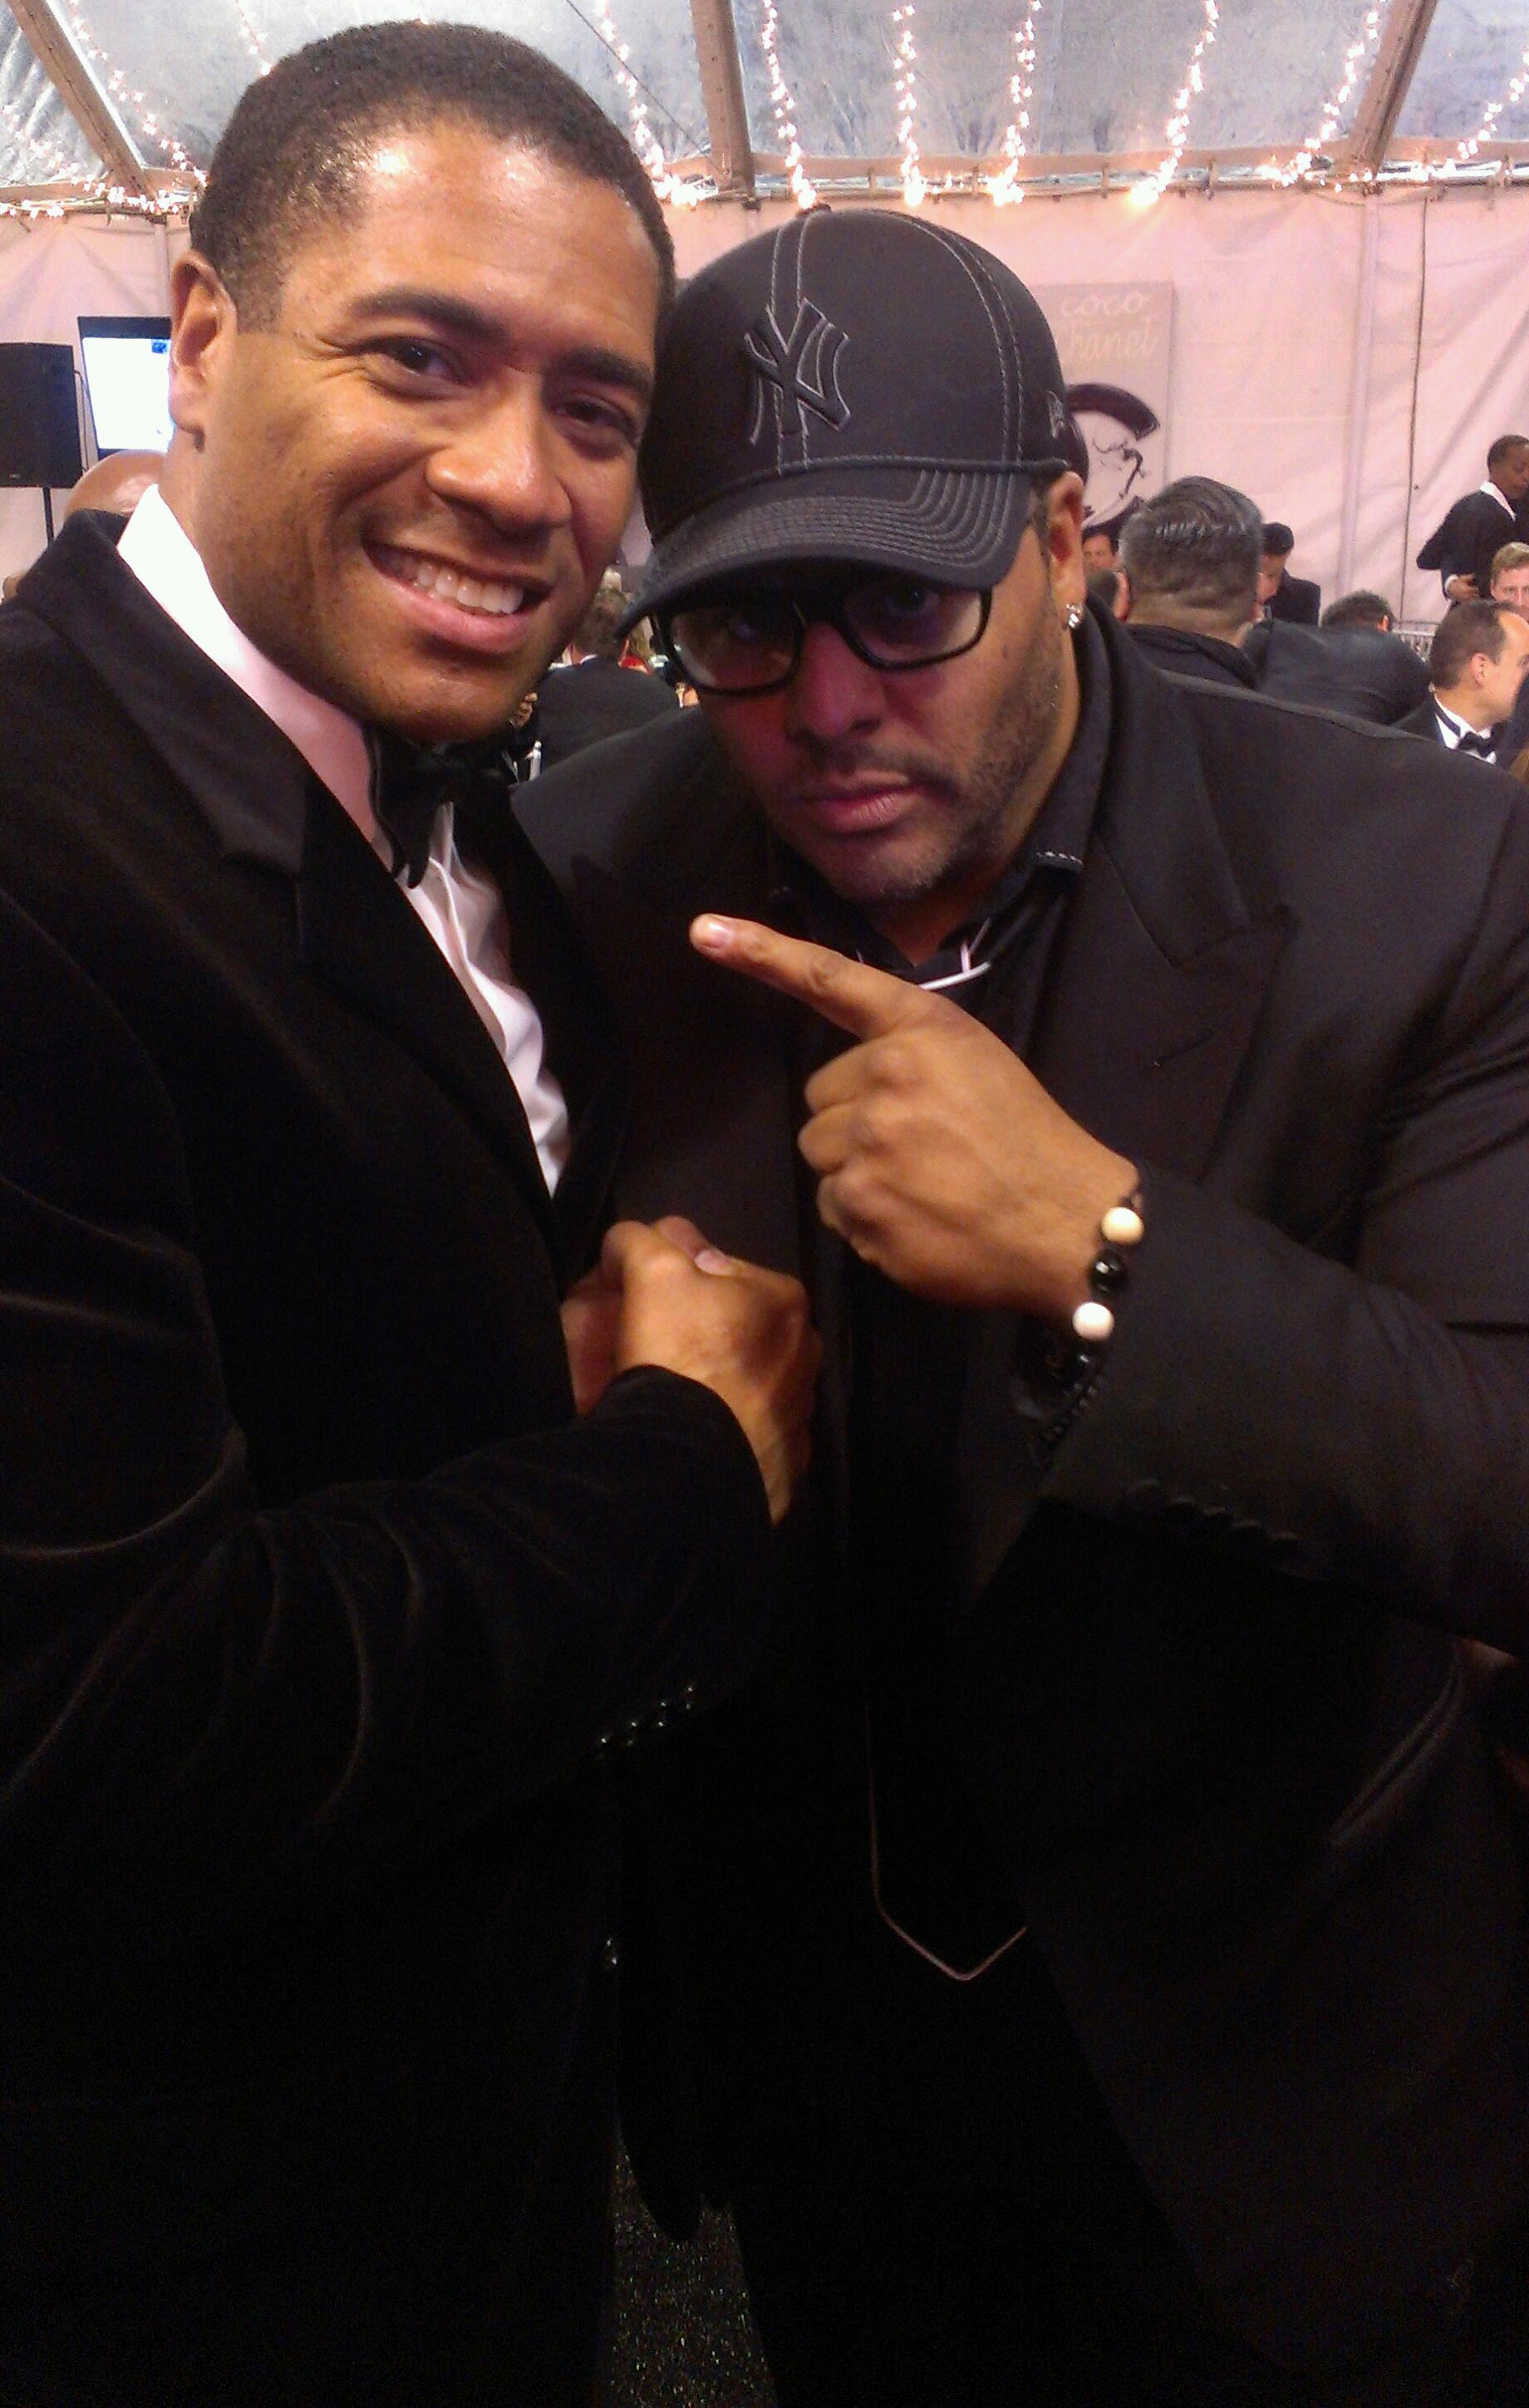 Al B. Sure and Mandell Frazier at event of Mandell Frazier at event of the 